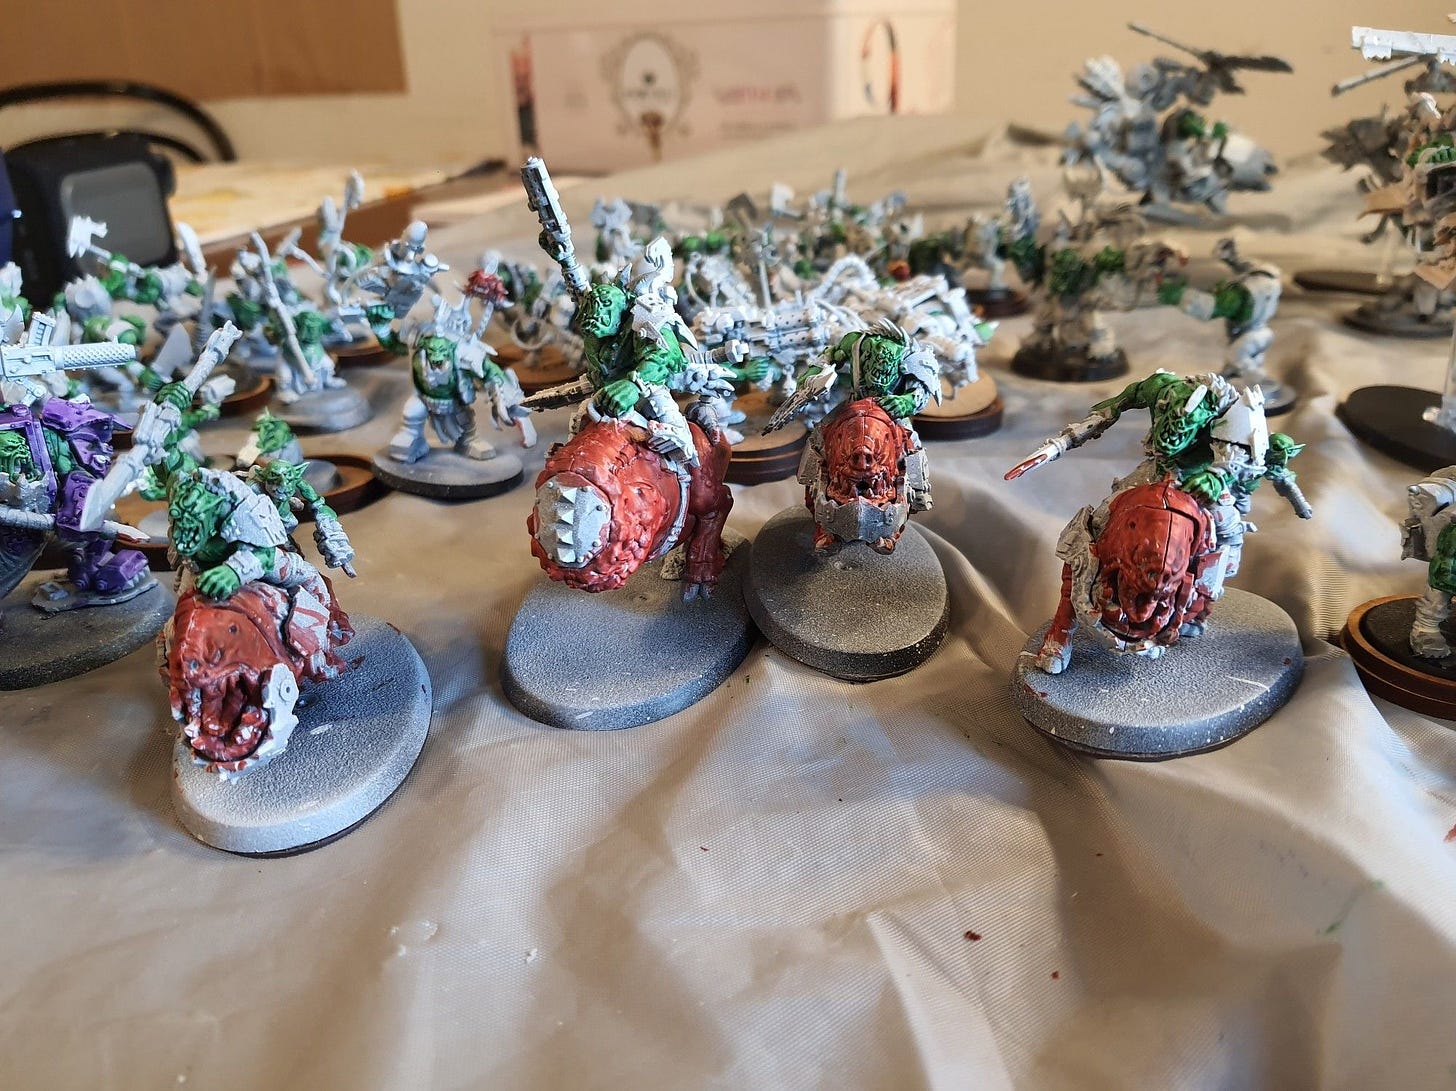 A squad of Squighog Boyz, led by a Nob on Smasha Squig. Their mounts are painted in Blood Angels Red, while the Orks and Grots are painted in contrast green. The rest of the minis remain base coated in white, but one of the spears has blood marks in it.